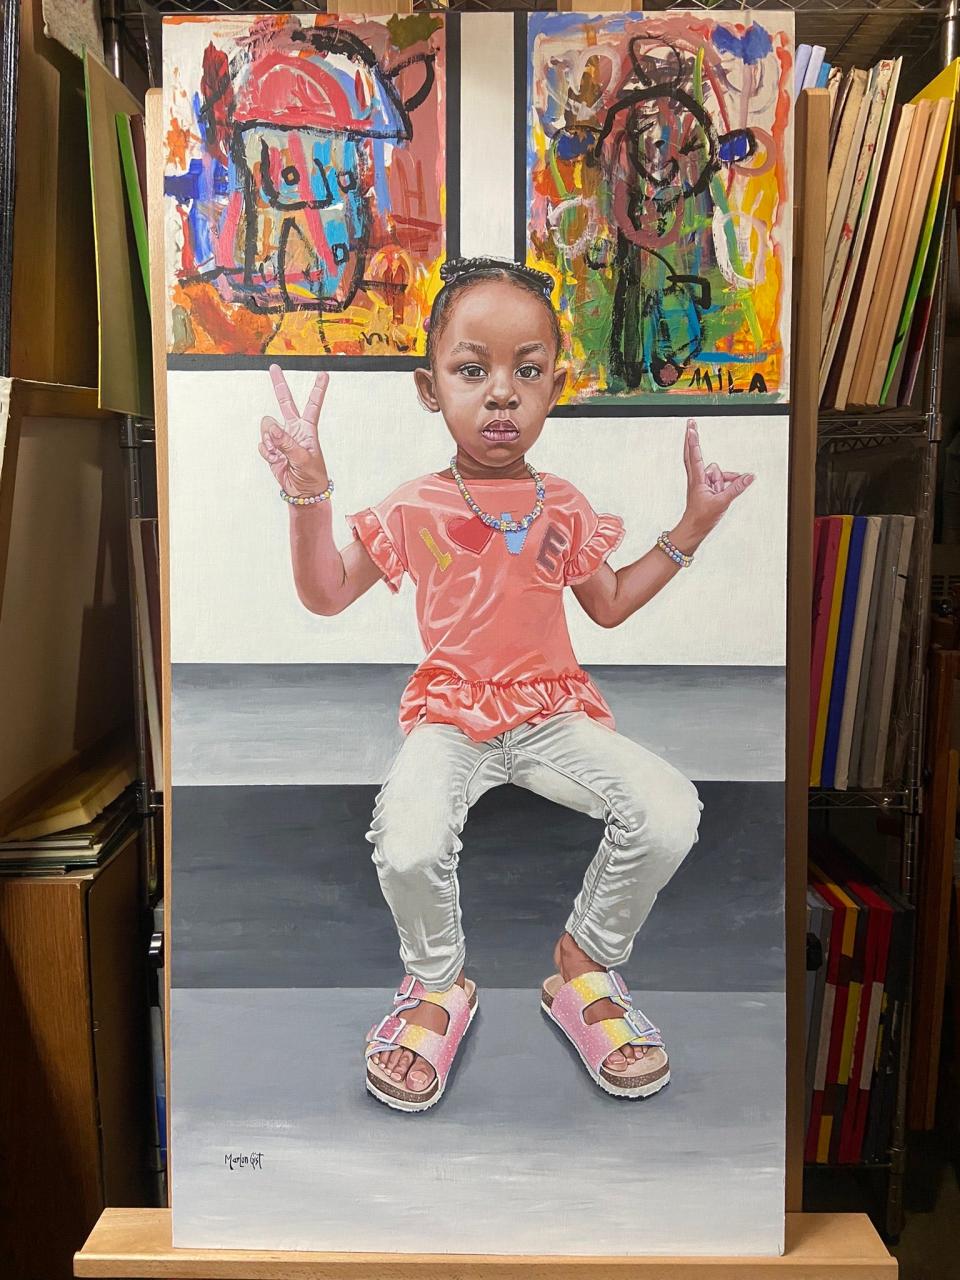 "Mila's Art Gallery" is a painting by Aliquippa artist Marlon Gist to be featured at Pittsburgh International Airport.